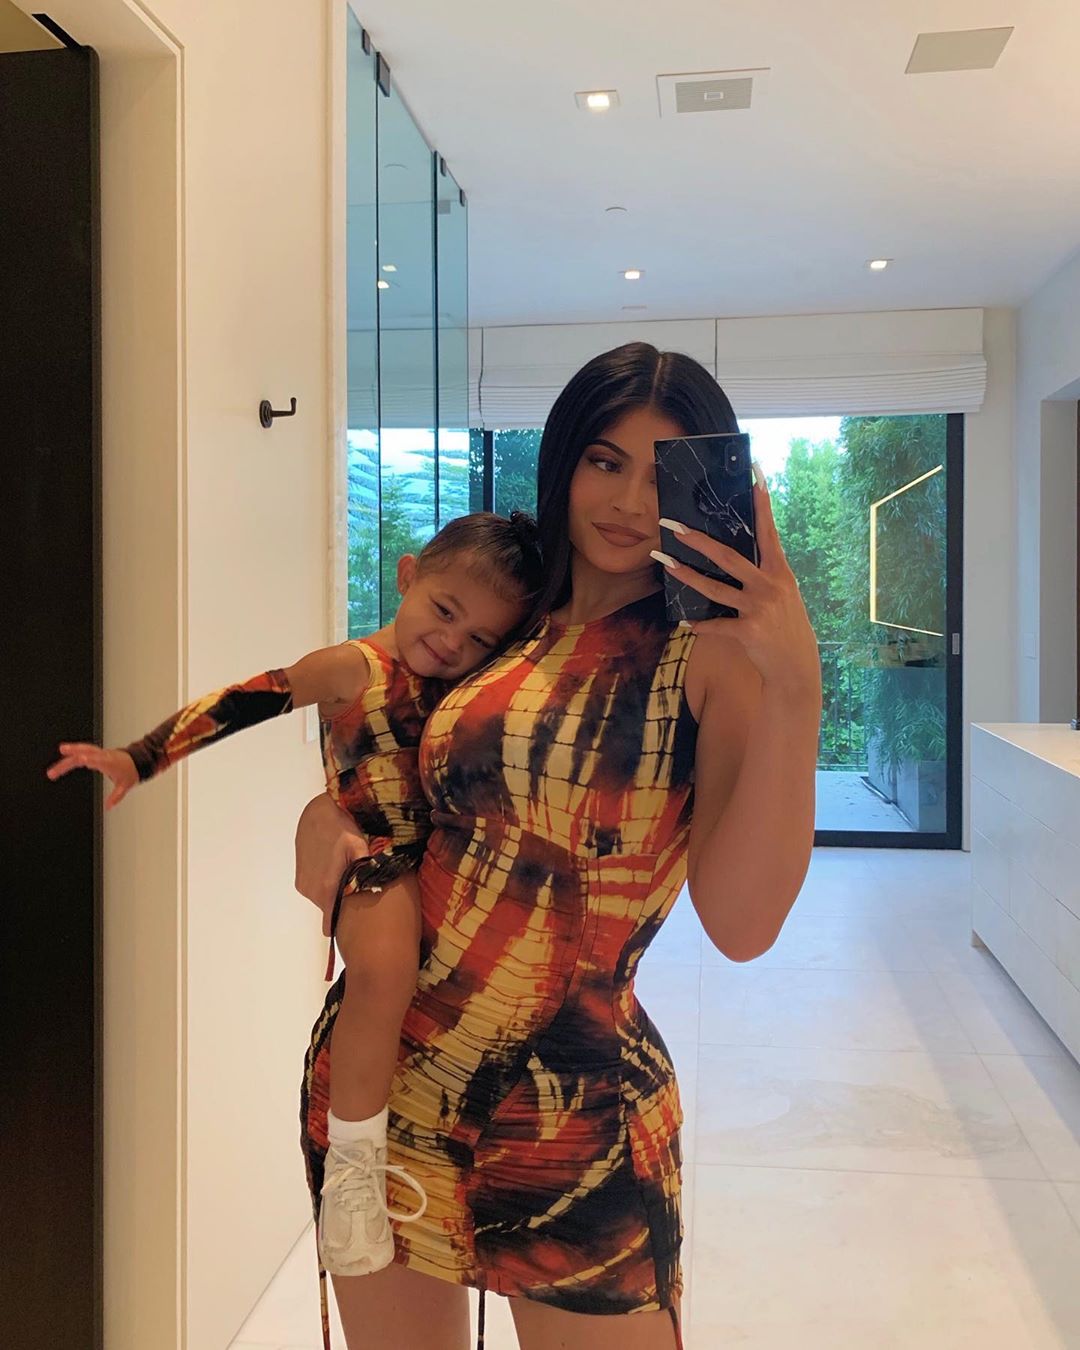 Kylie Jenner's Birth Announcement Video Shows Daughter's Closet